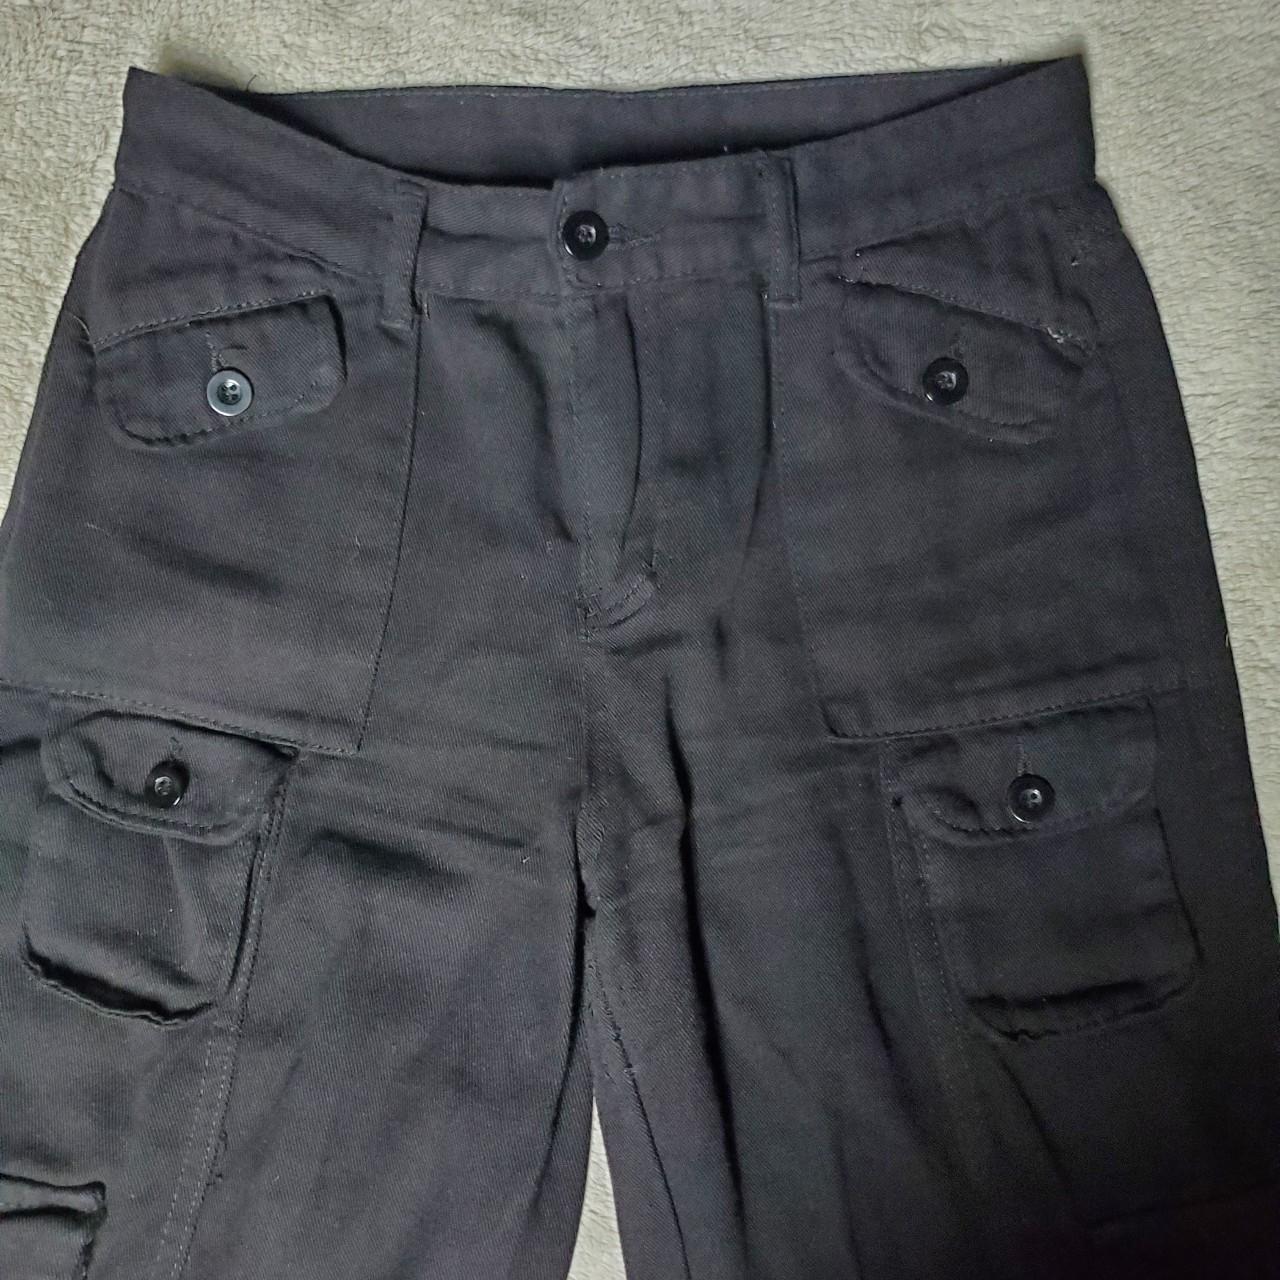 BLACK BAGGY CARGO PANTS has lots of pockets which I... - Depop